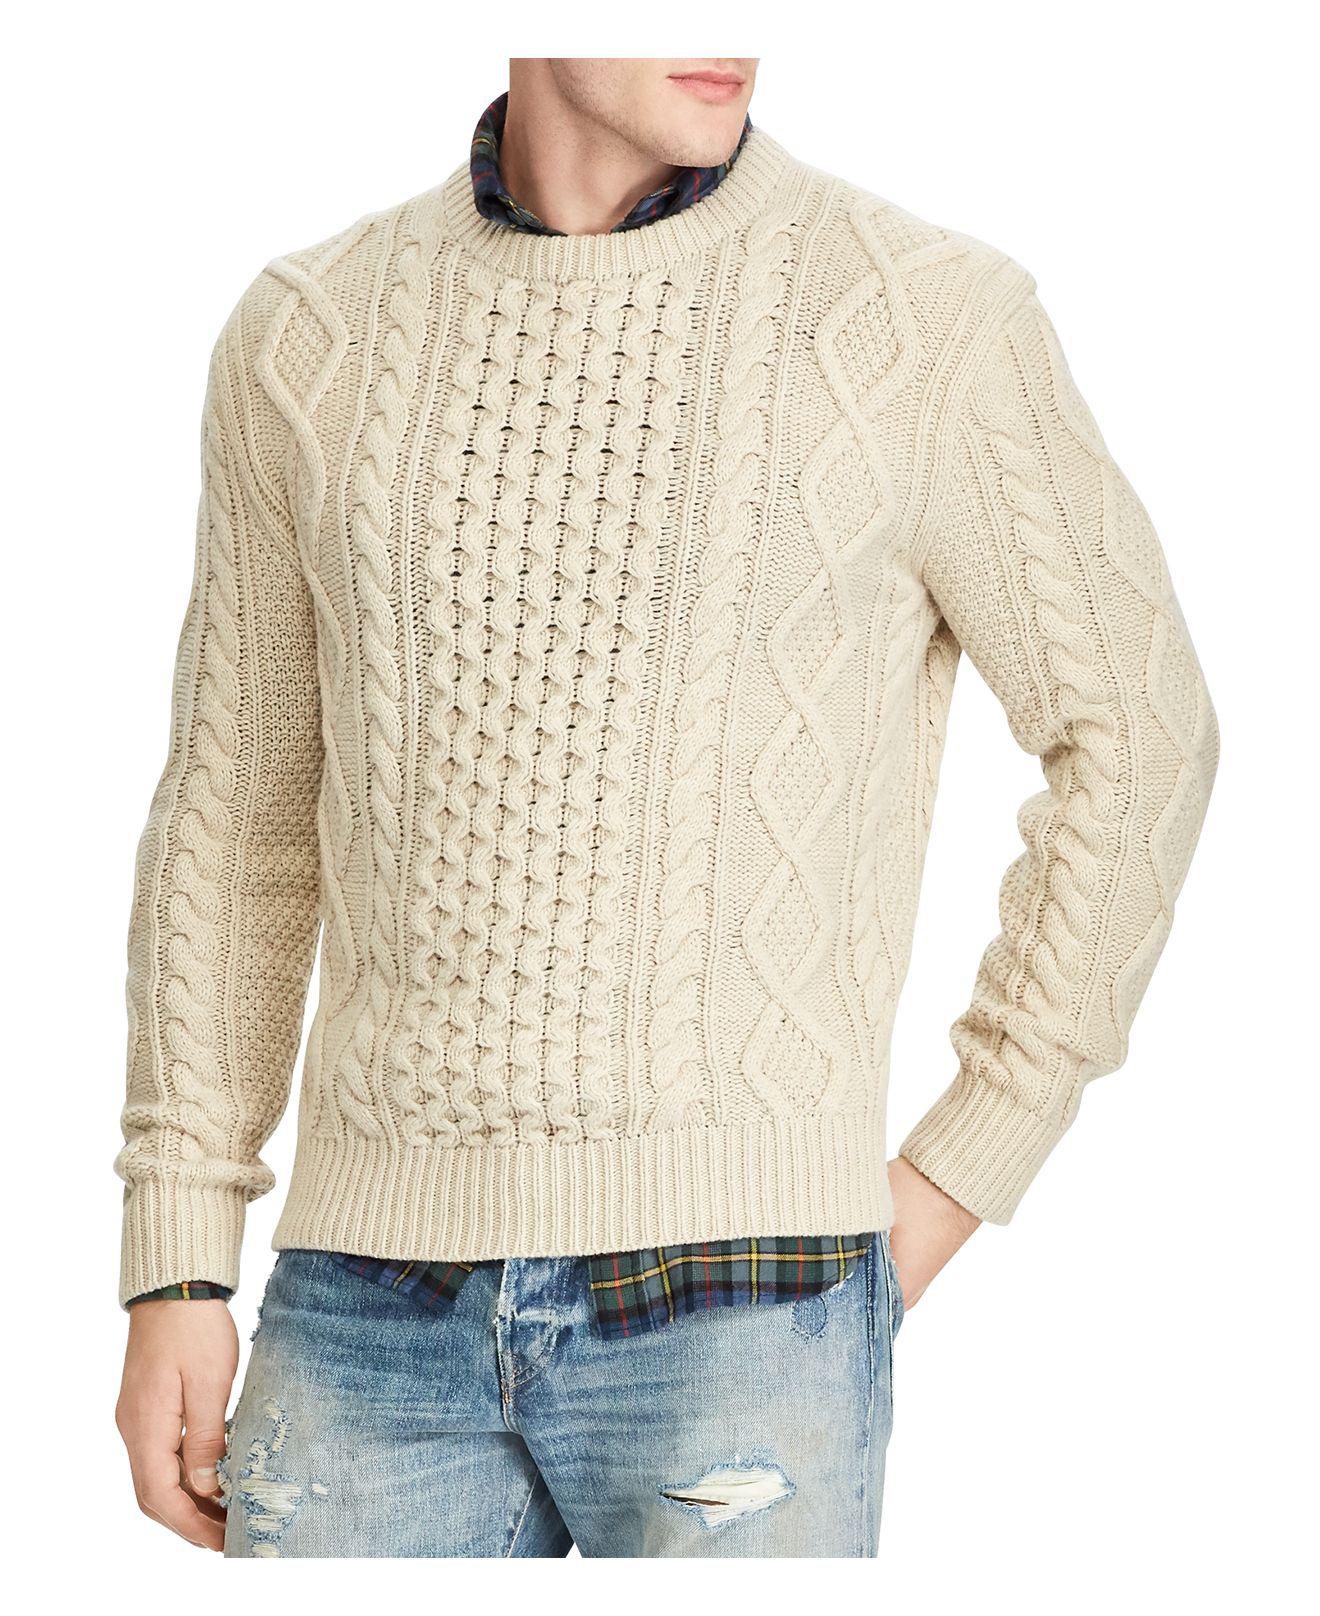 Polo Ralph Lauren Wool Iconic Fisherman's Sweater in Cream (Natural ...